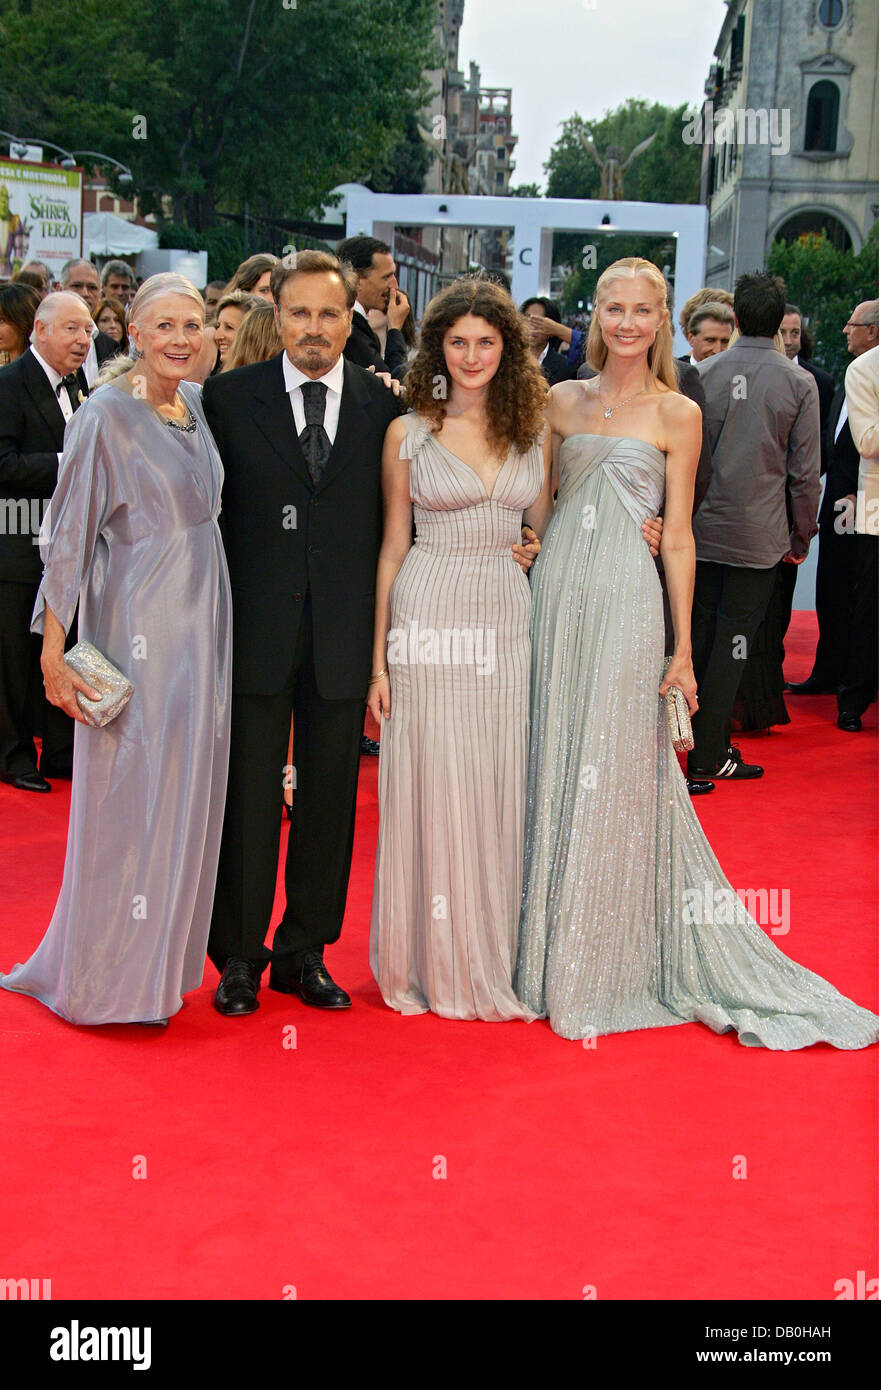 Vanessa Redgrave (L-R), Franco Nero, Daisy Bevan and Joely Richardson arrive at the premiere of the film 'Atonement' at the opening of the 64th International Venice Film Festival at Palazzo del Casino in Venice, Italy, 29 August 2007. Photo: Hubert Boesl Stock Photo